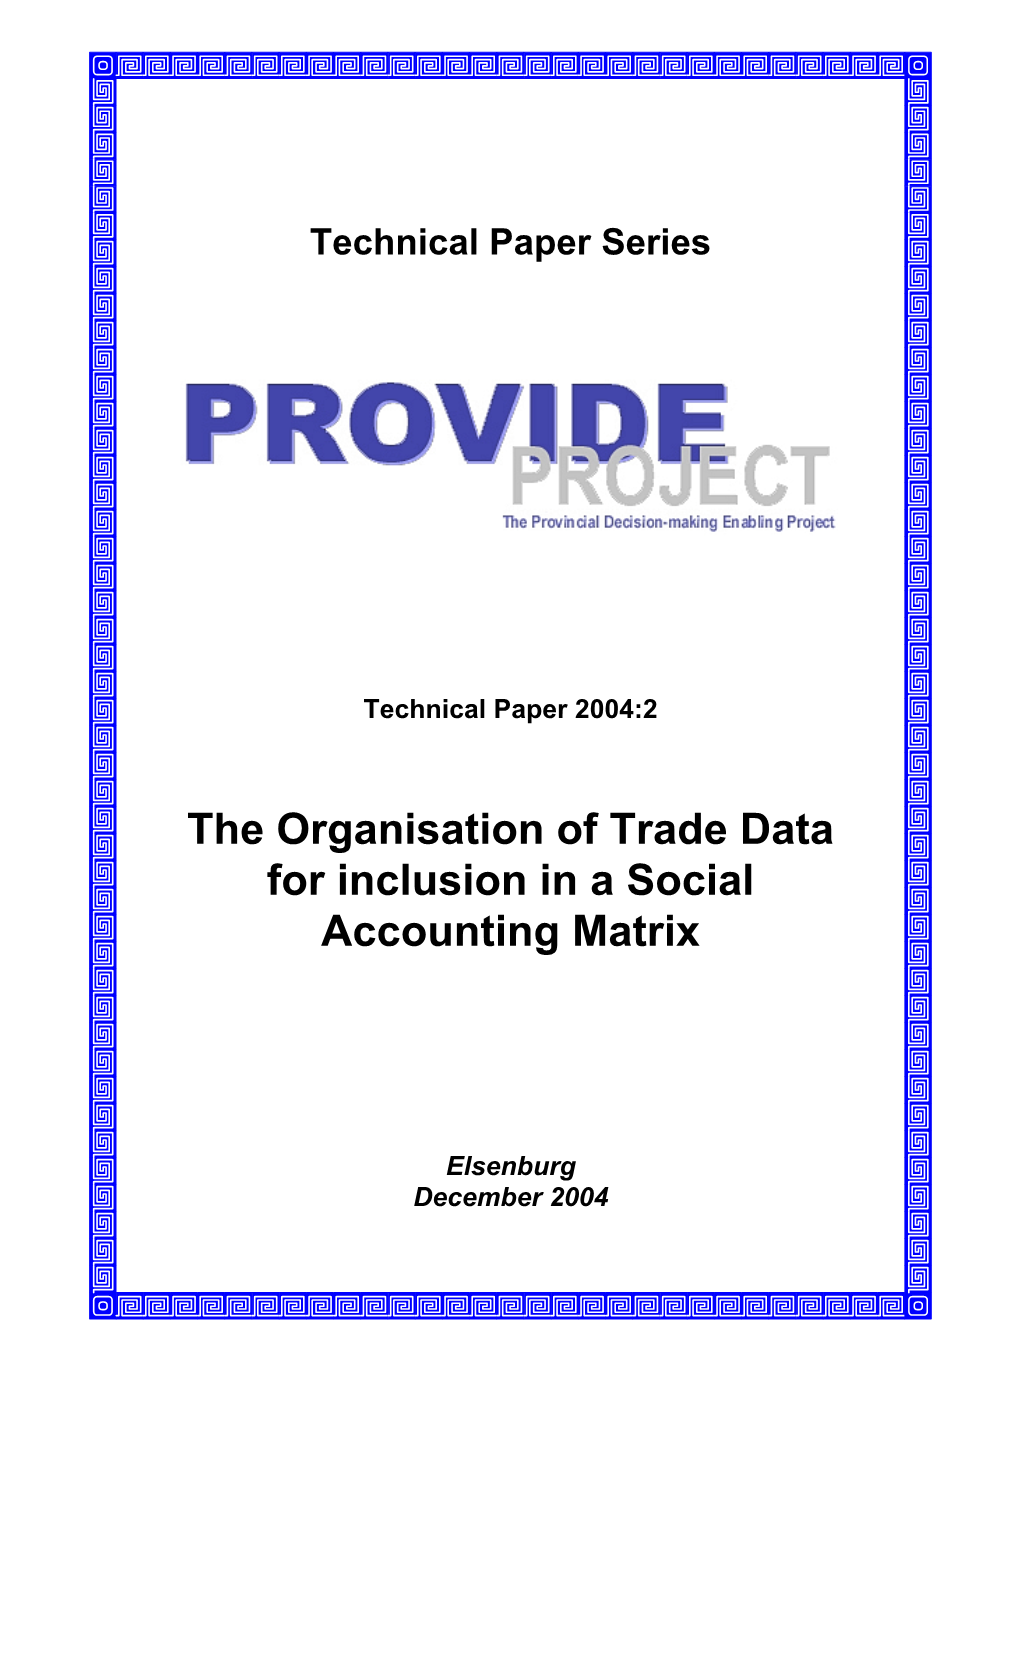 The Organisation of Trade Data for Inclusion in a Social Accounting Matrix